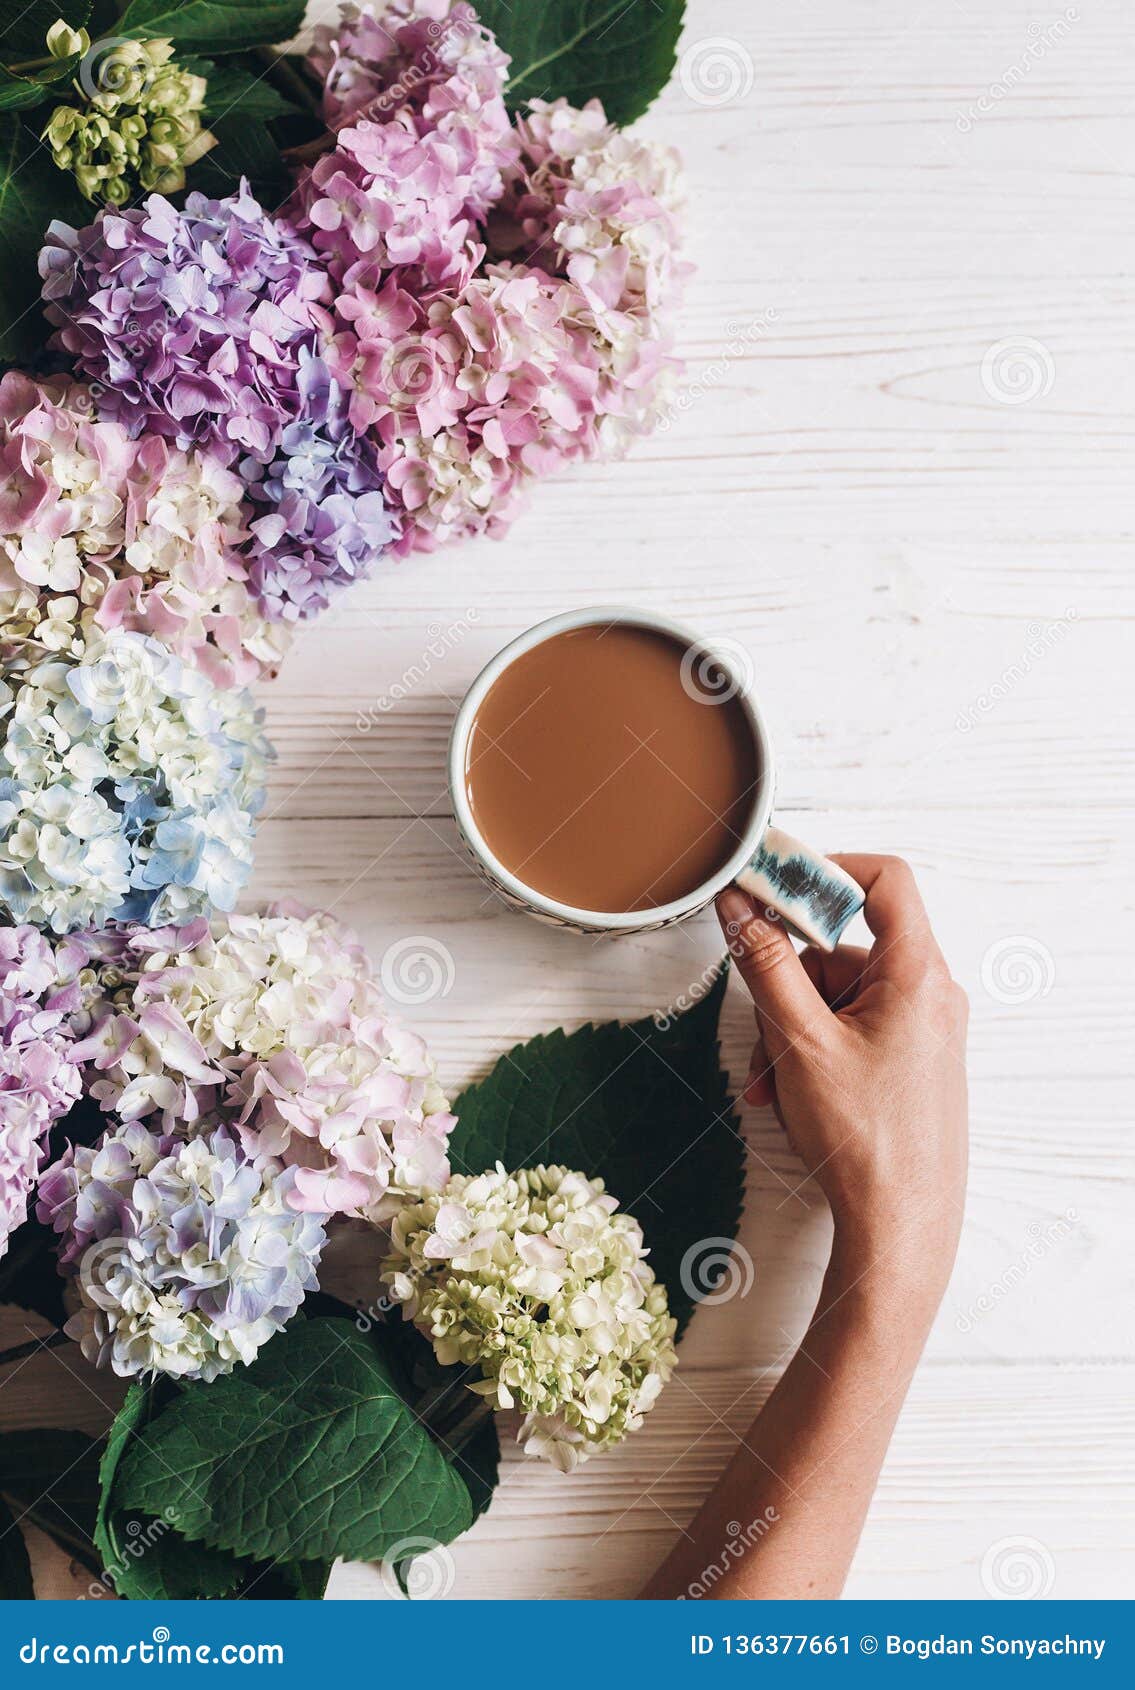 https://thumbs.dreamstime.com/z/hand-holding-coffee-cup-beautiful-hydrangea-flowers-rustic-white-wood-flat-lay-good-morning-concept-colorful-pink-blue-hand-136377661.jpg